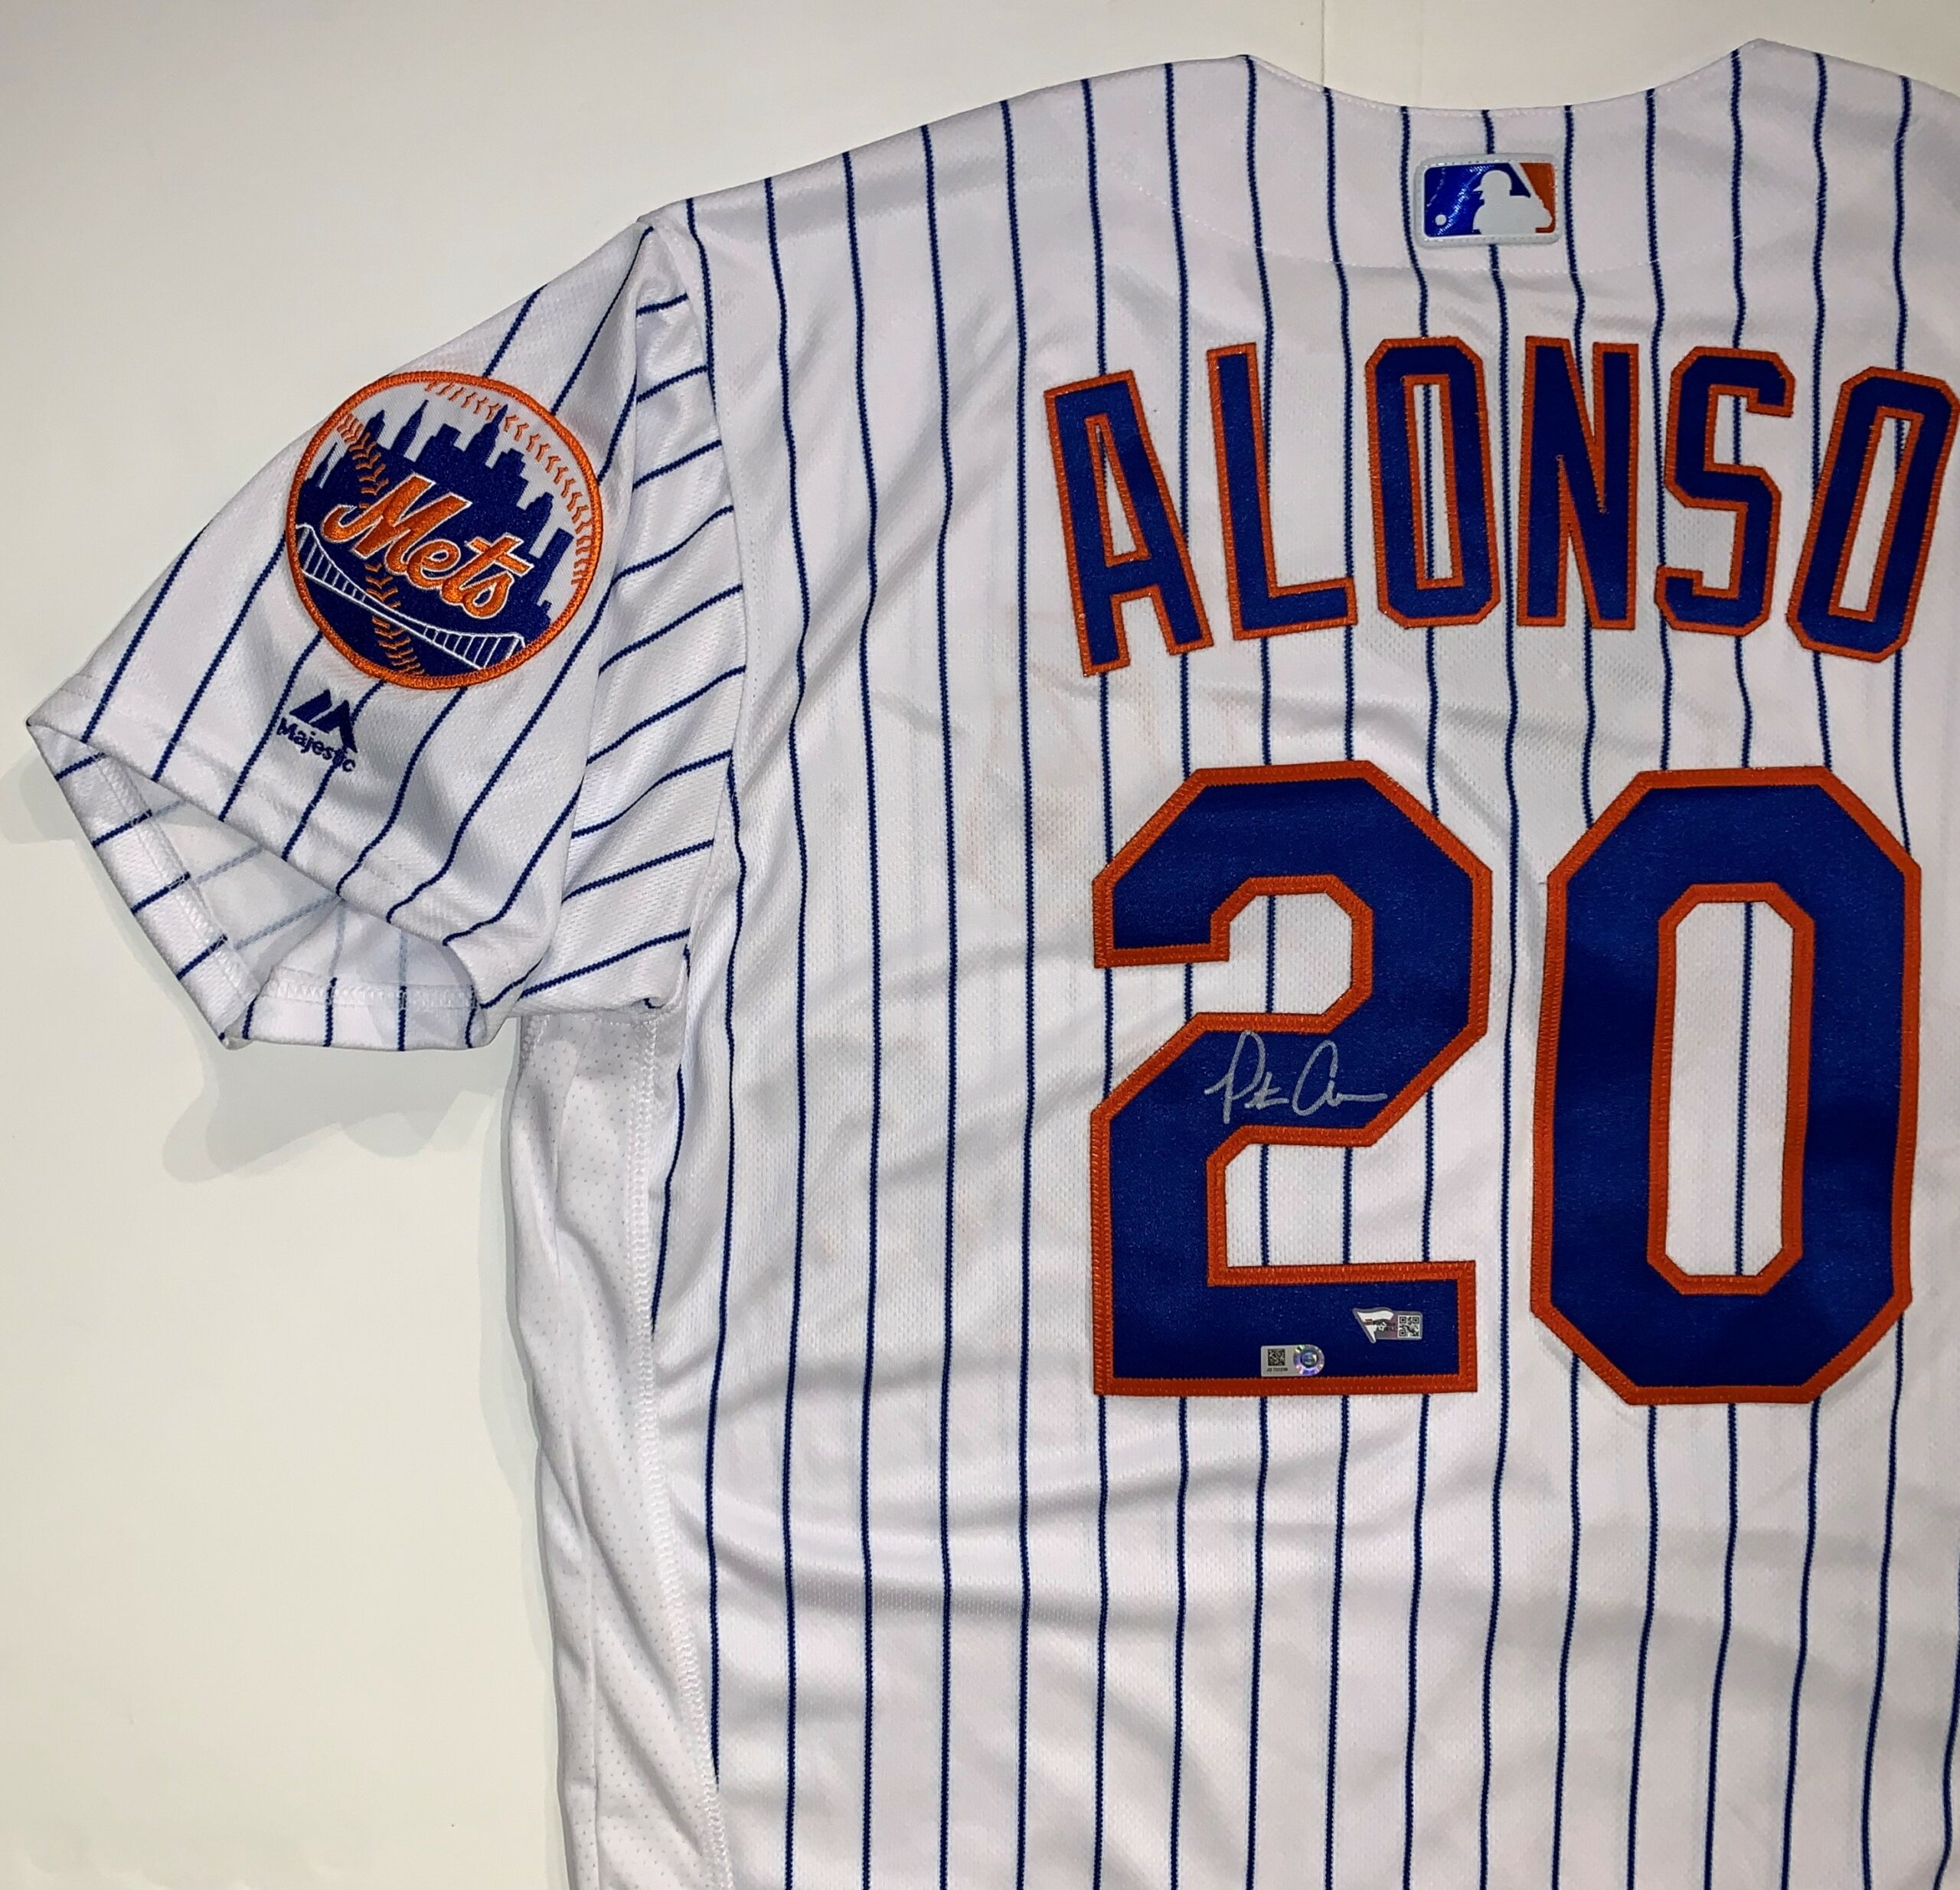 Pete Alonso #20 - Autographed Game Used Road Grey Jersey - 3-4, 2